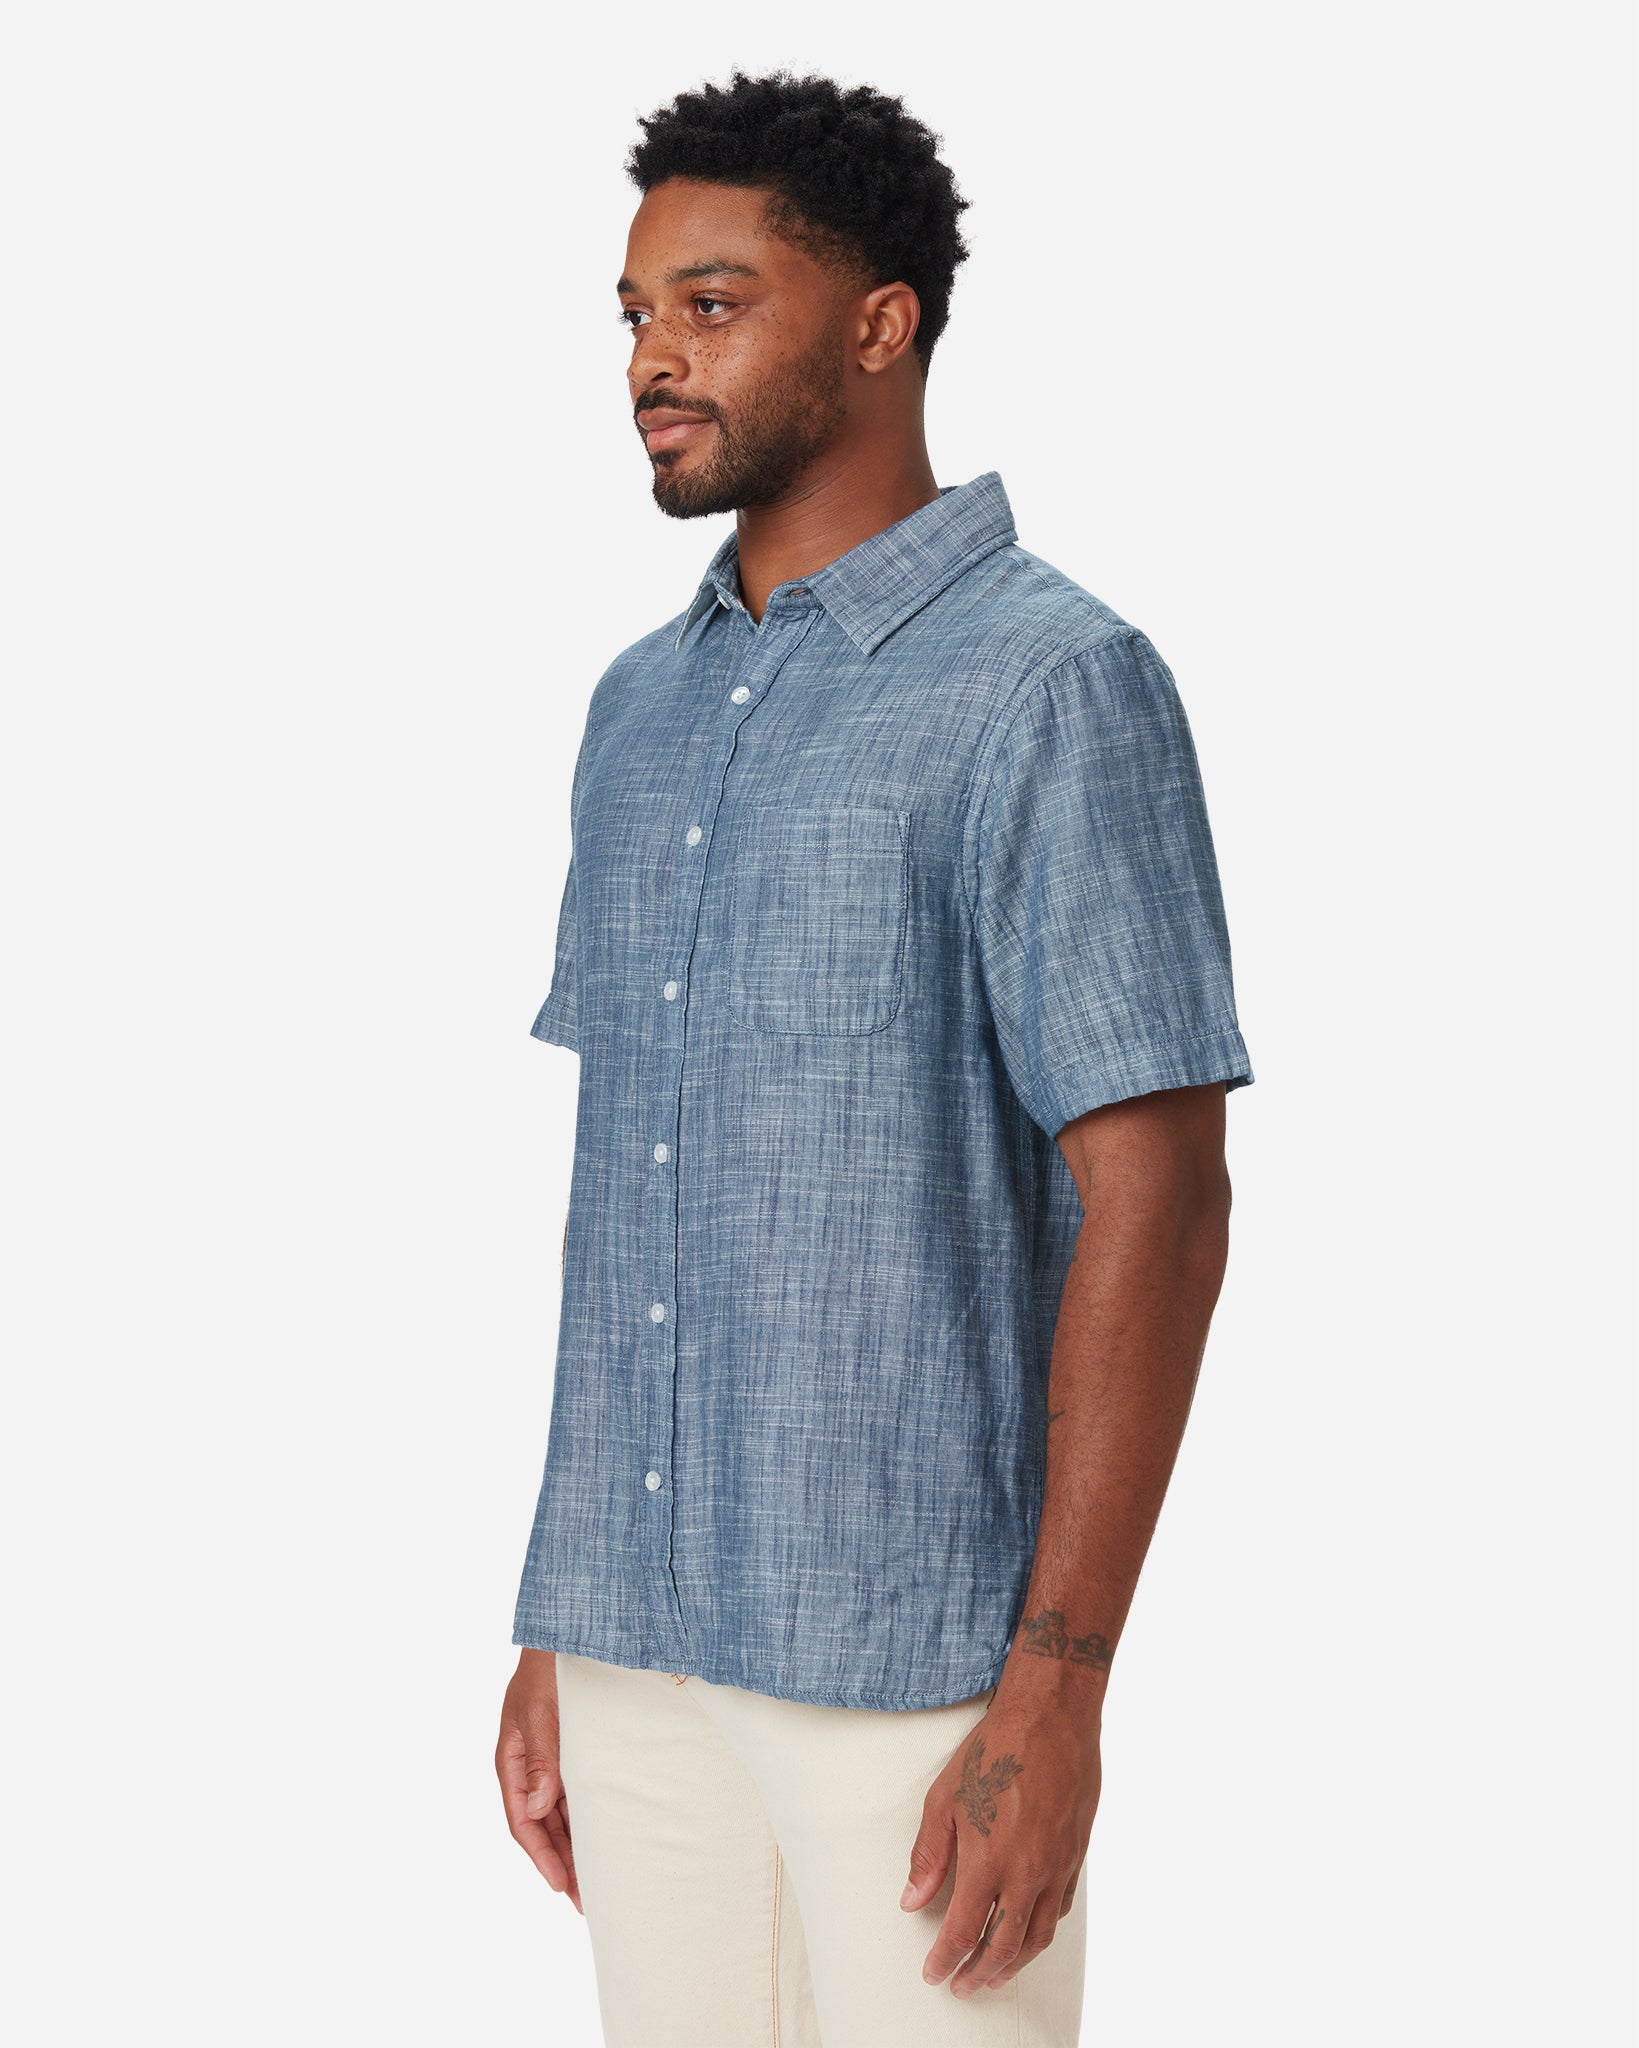 Model with front and rightward gaze wearing Ace Rivington short-sleeved indigo slub soft textured-cotton shirt with linen hand feel, pearl buttons, left-breast pocket, collar, and off white interior and pair of Ace Rivington ecru color denim jeans